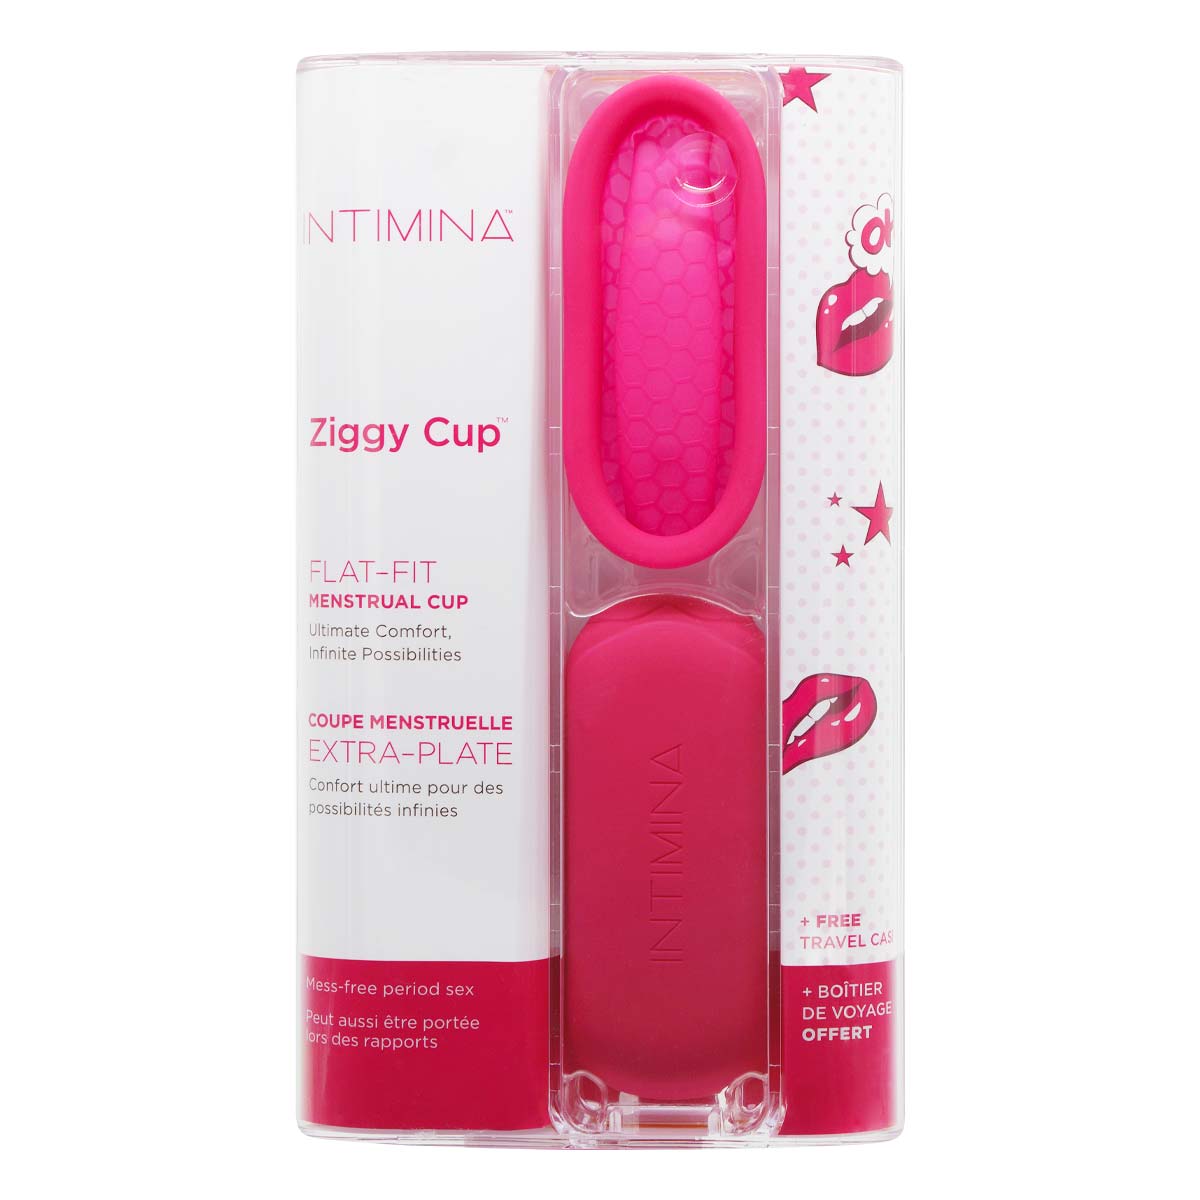 Intimina Ziggy Cup 76 ml (Menstrual Cup for Sex)-p_2